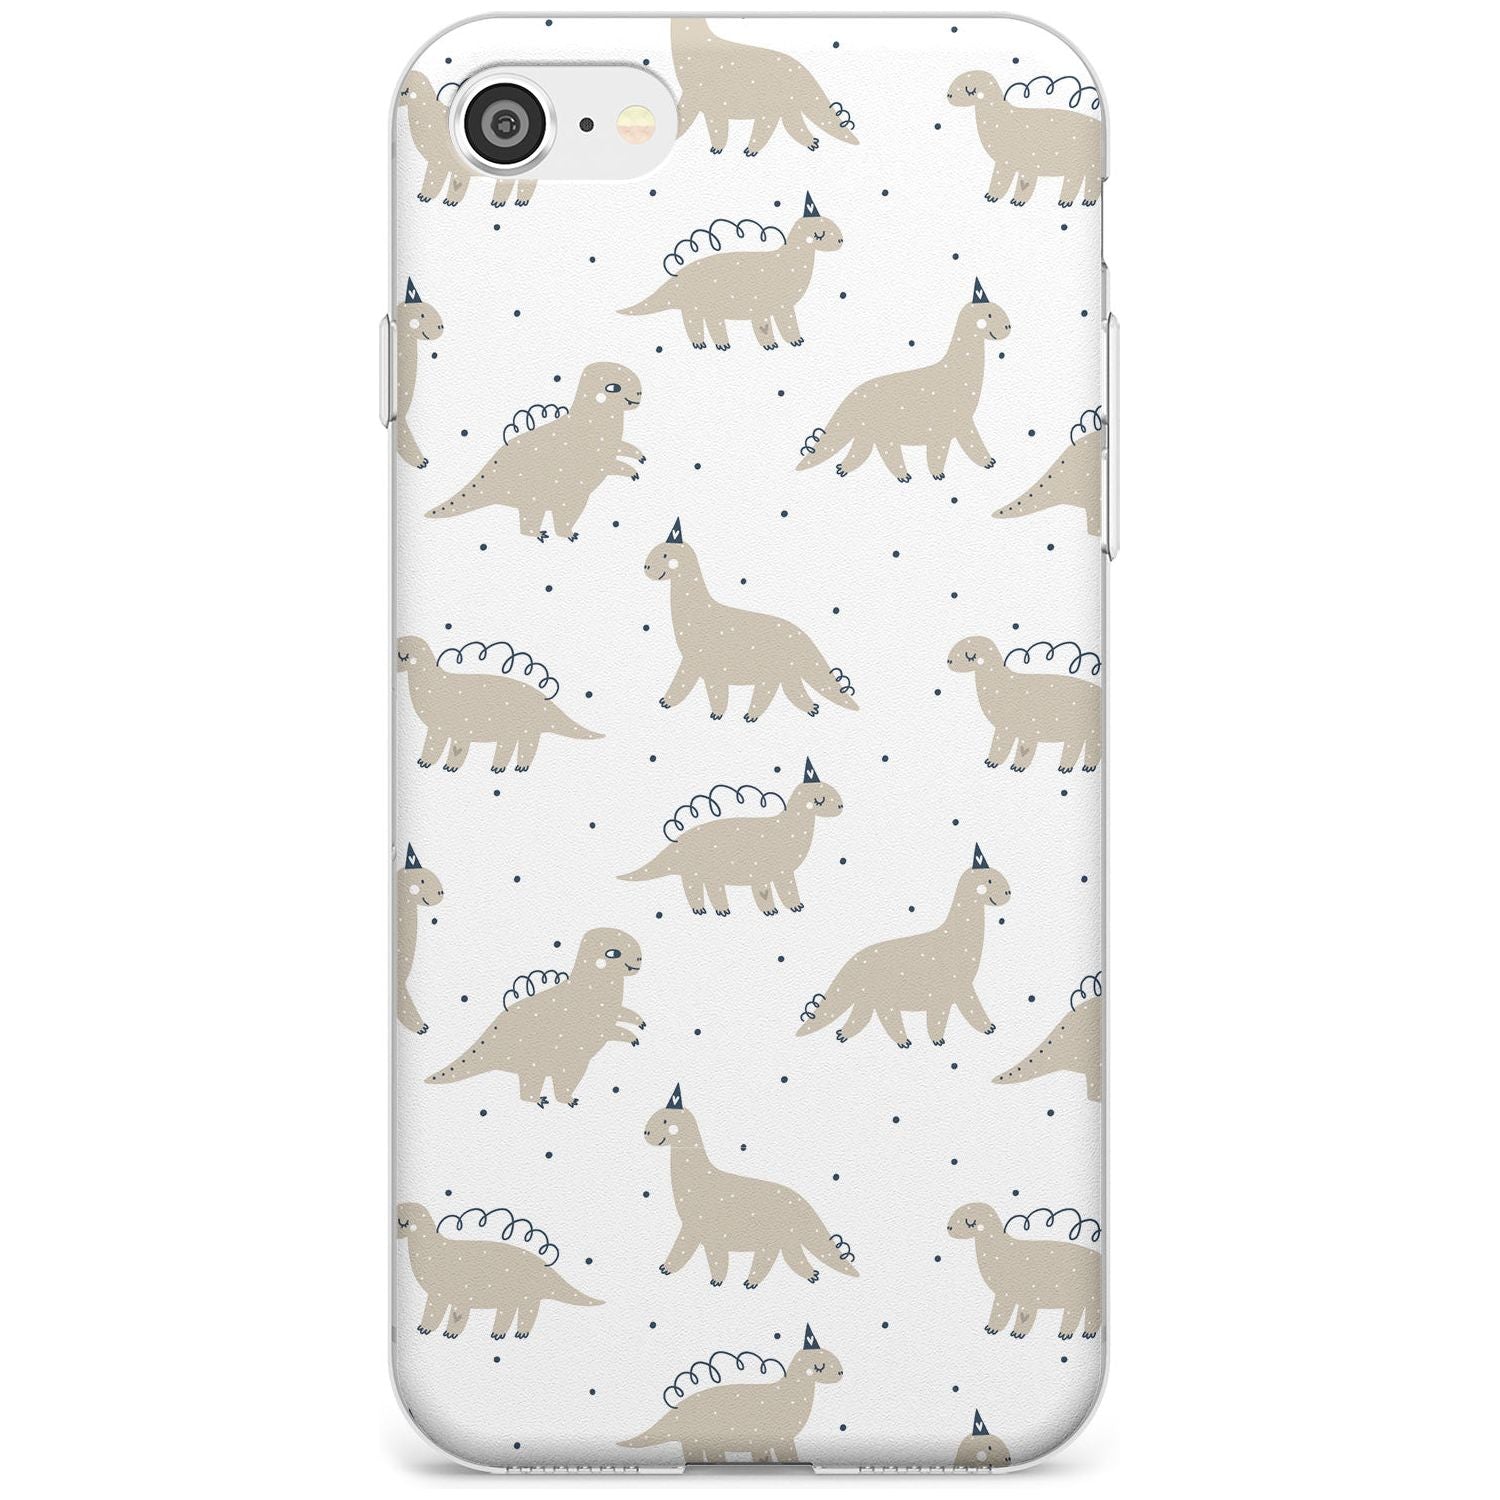 Adorable Dinosaurs Pattern Slim TPU Phone Case for iPhone SE 8 7 Plus